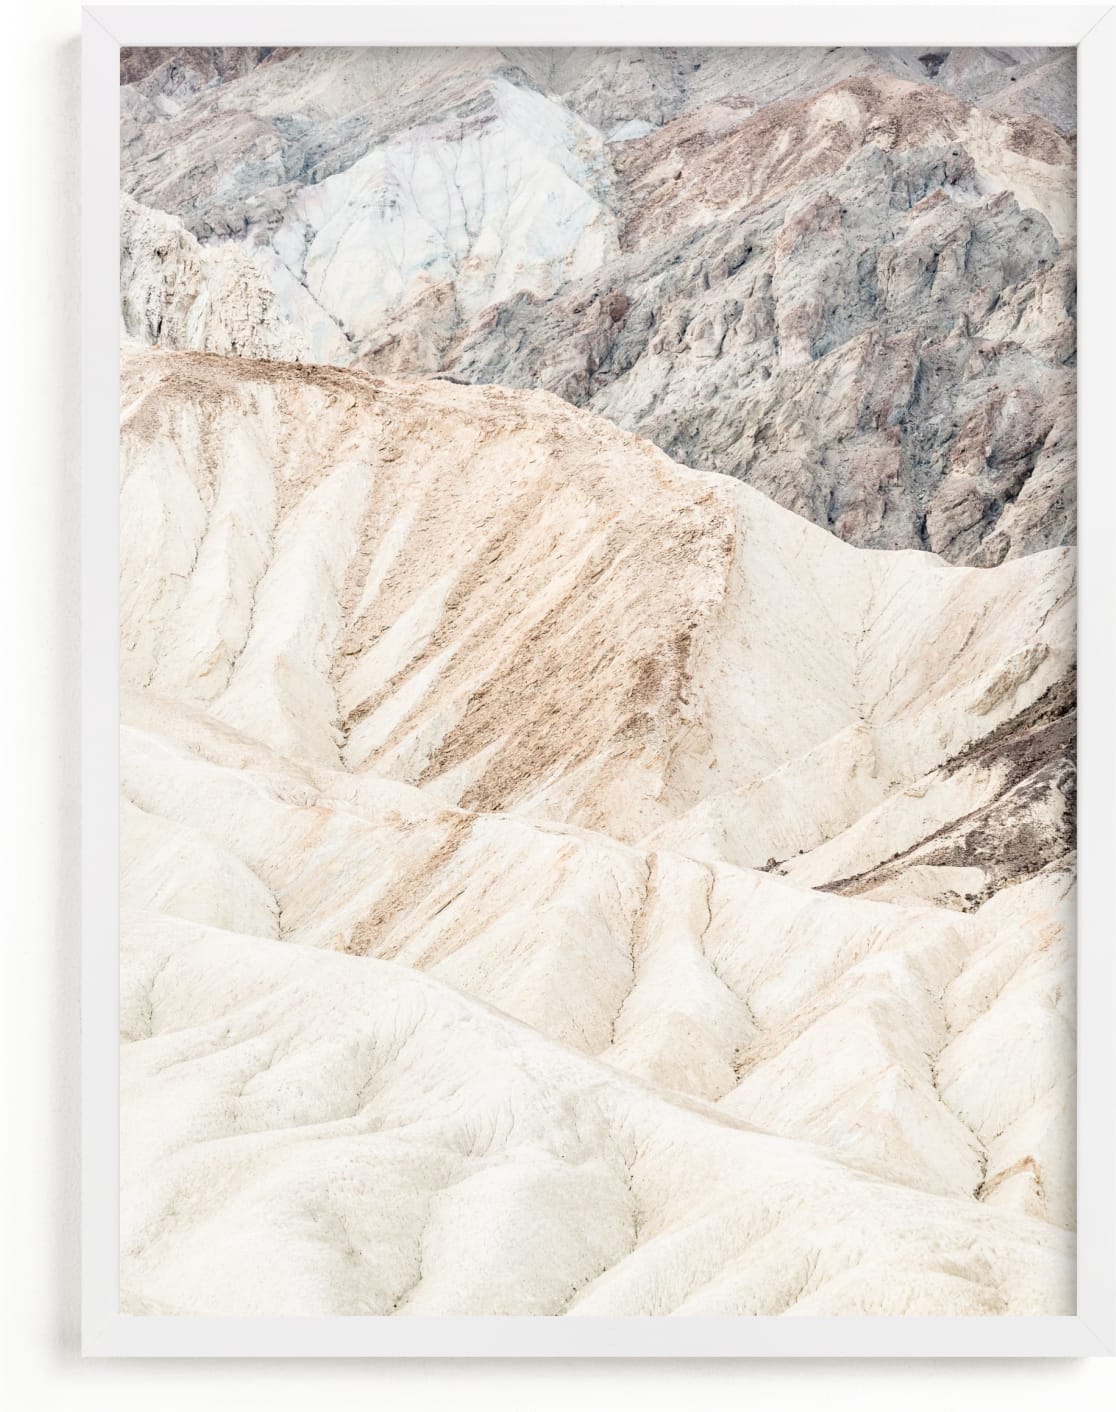 This is a white art by Kamala Nahas called White Canyon.